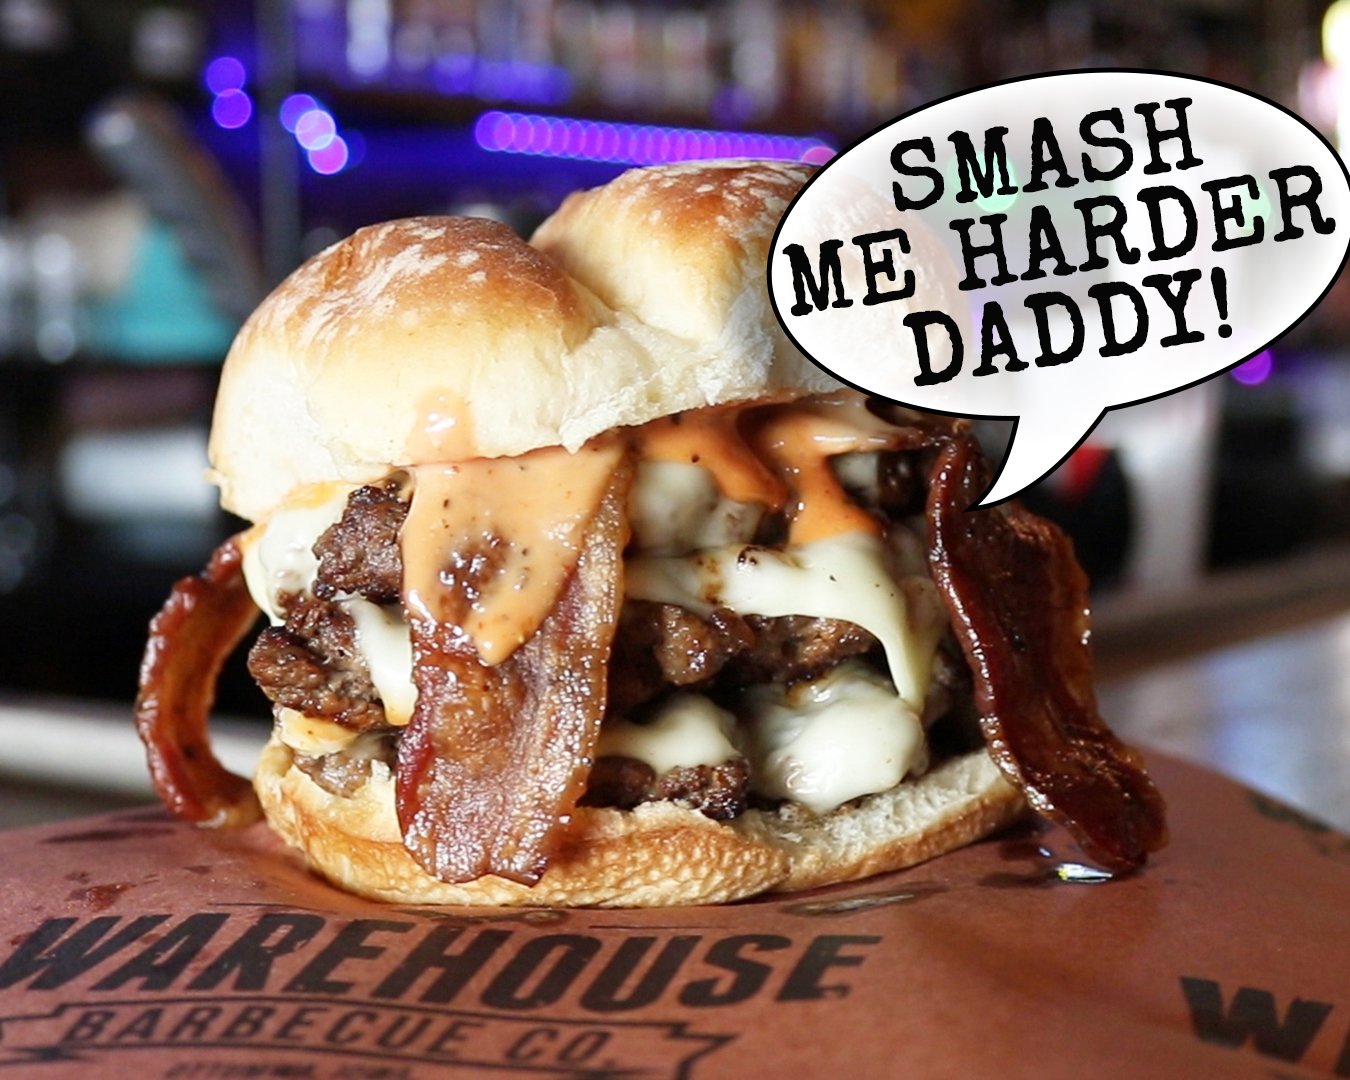 Don't get Hangry on Humpday, get SMASHED!

Wanting your Brisket Smashburgers to have extra SMASH? Ask for it at the register or type it into the instructions box on the app and we'll make sure your burger gets the extra smash it deserves! 🙌🏼

Step 